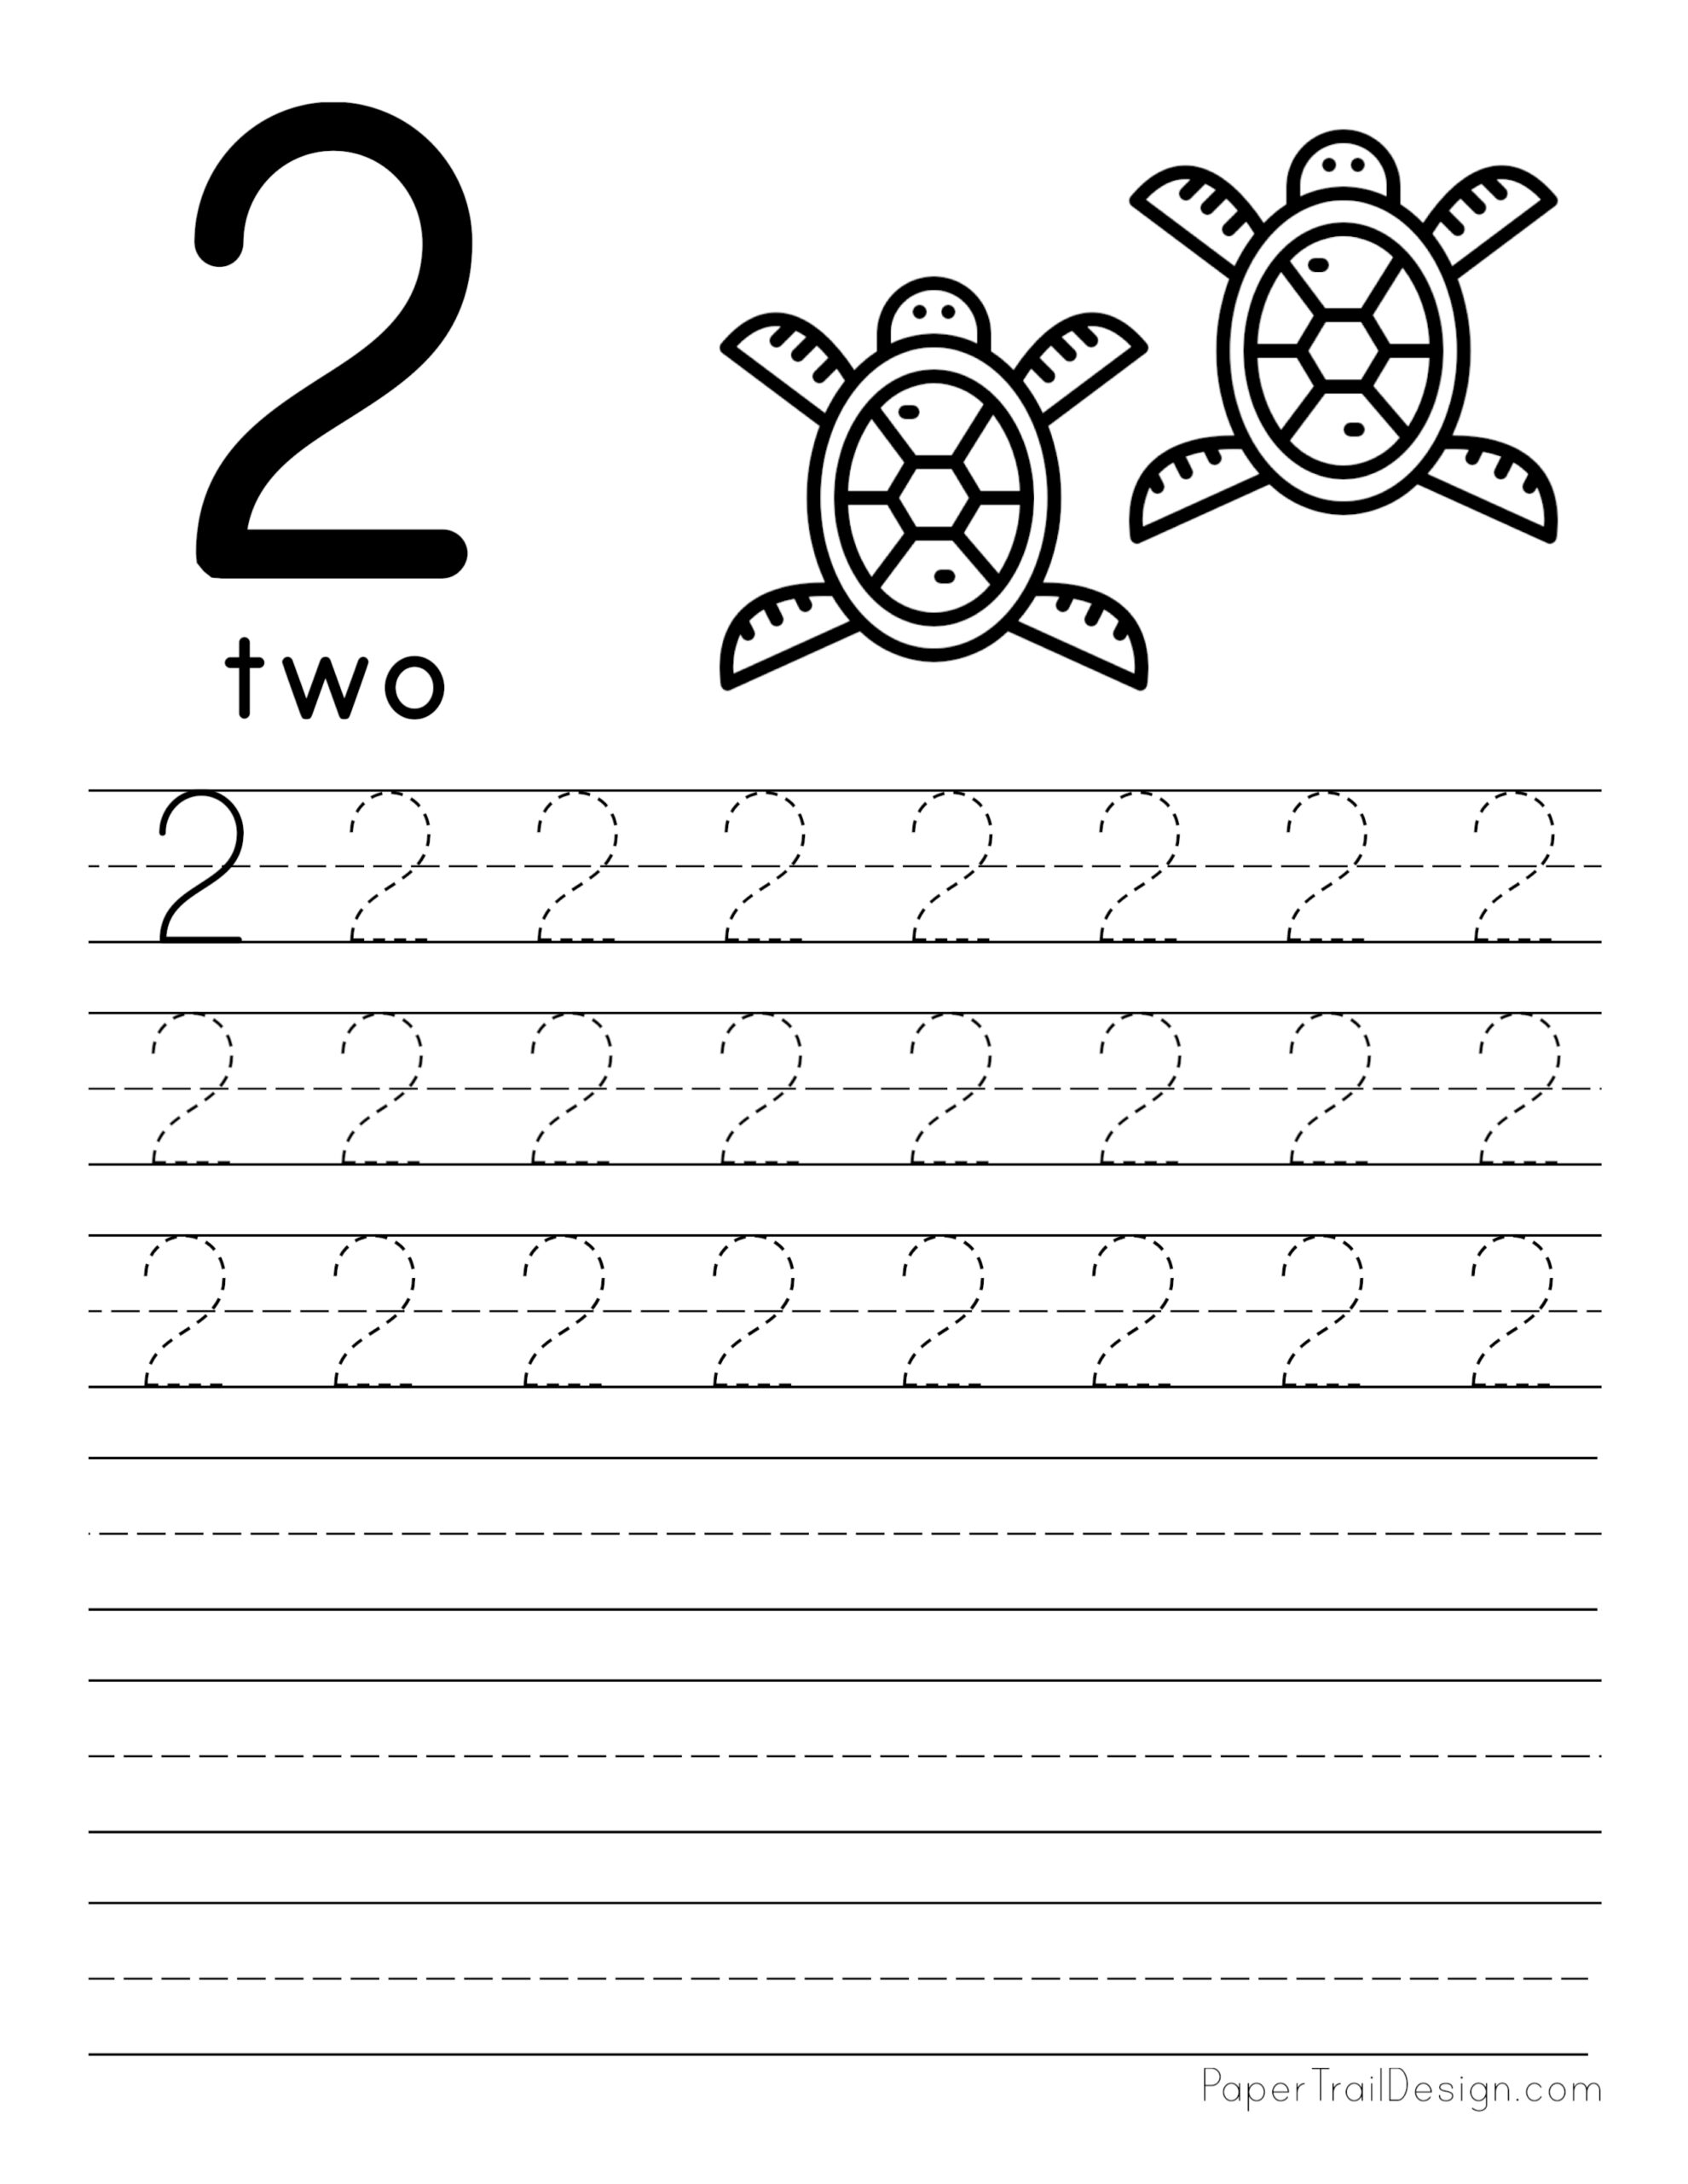 worksheets tracing numbers 1 20